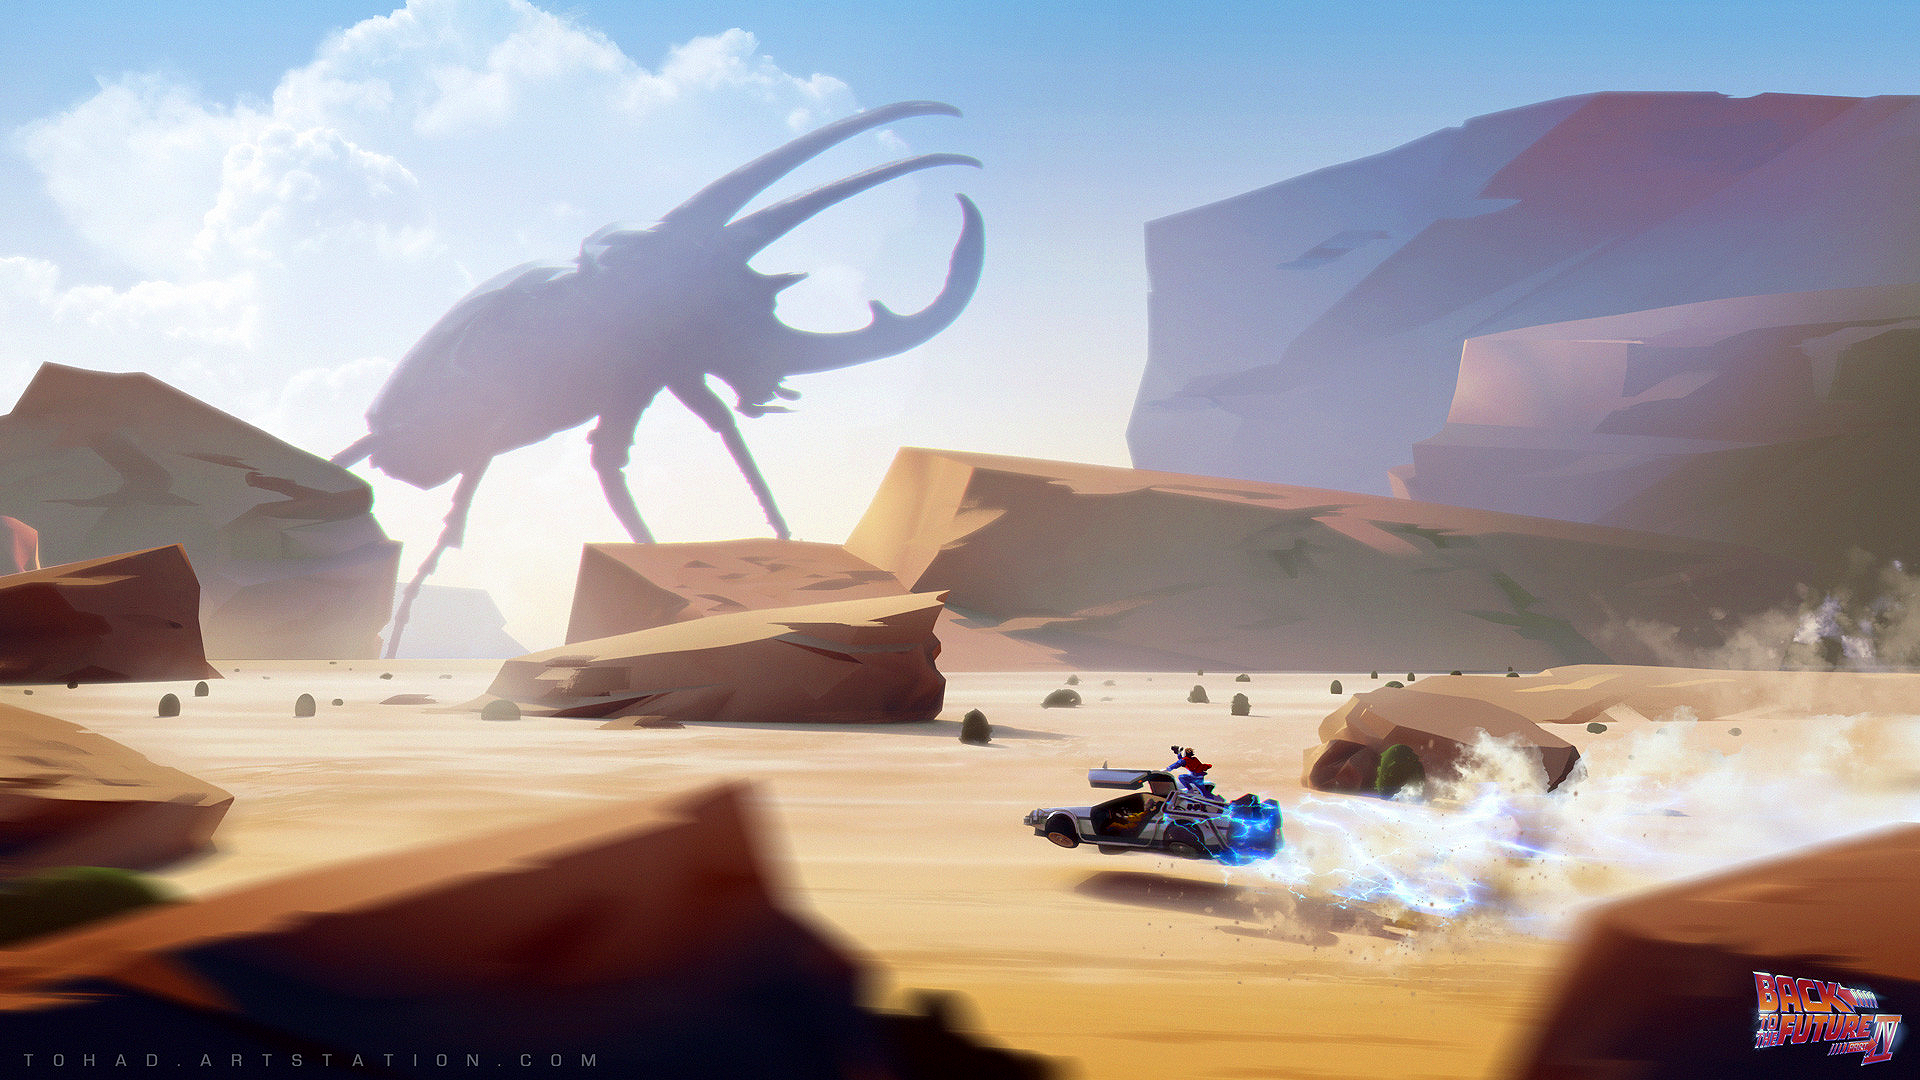 Sylvain Sarrailh Giant Creature Insect Back To The Future Flying Car DeLorean Lightning Beetle Deser 1920x1080